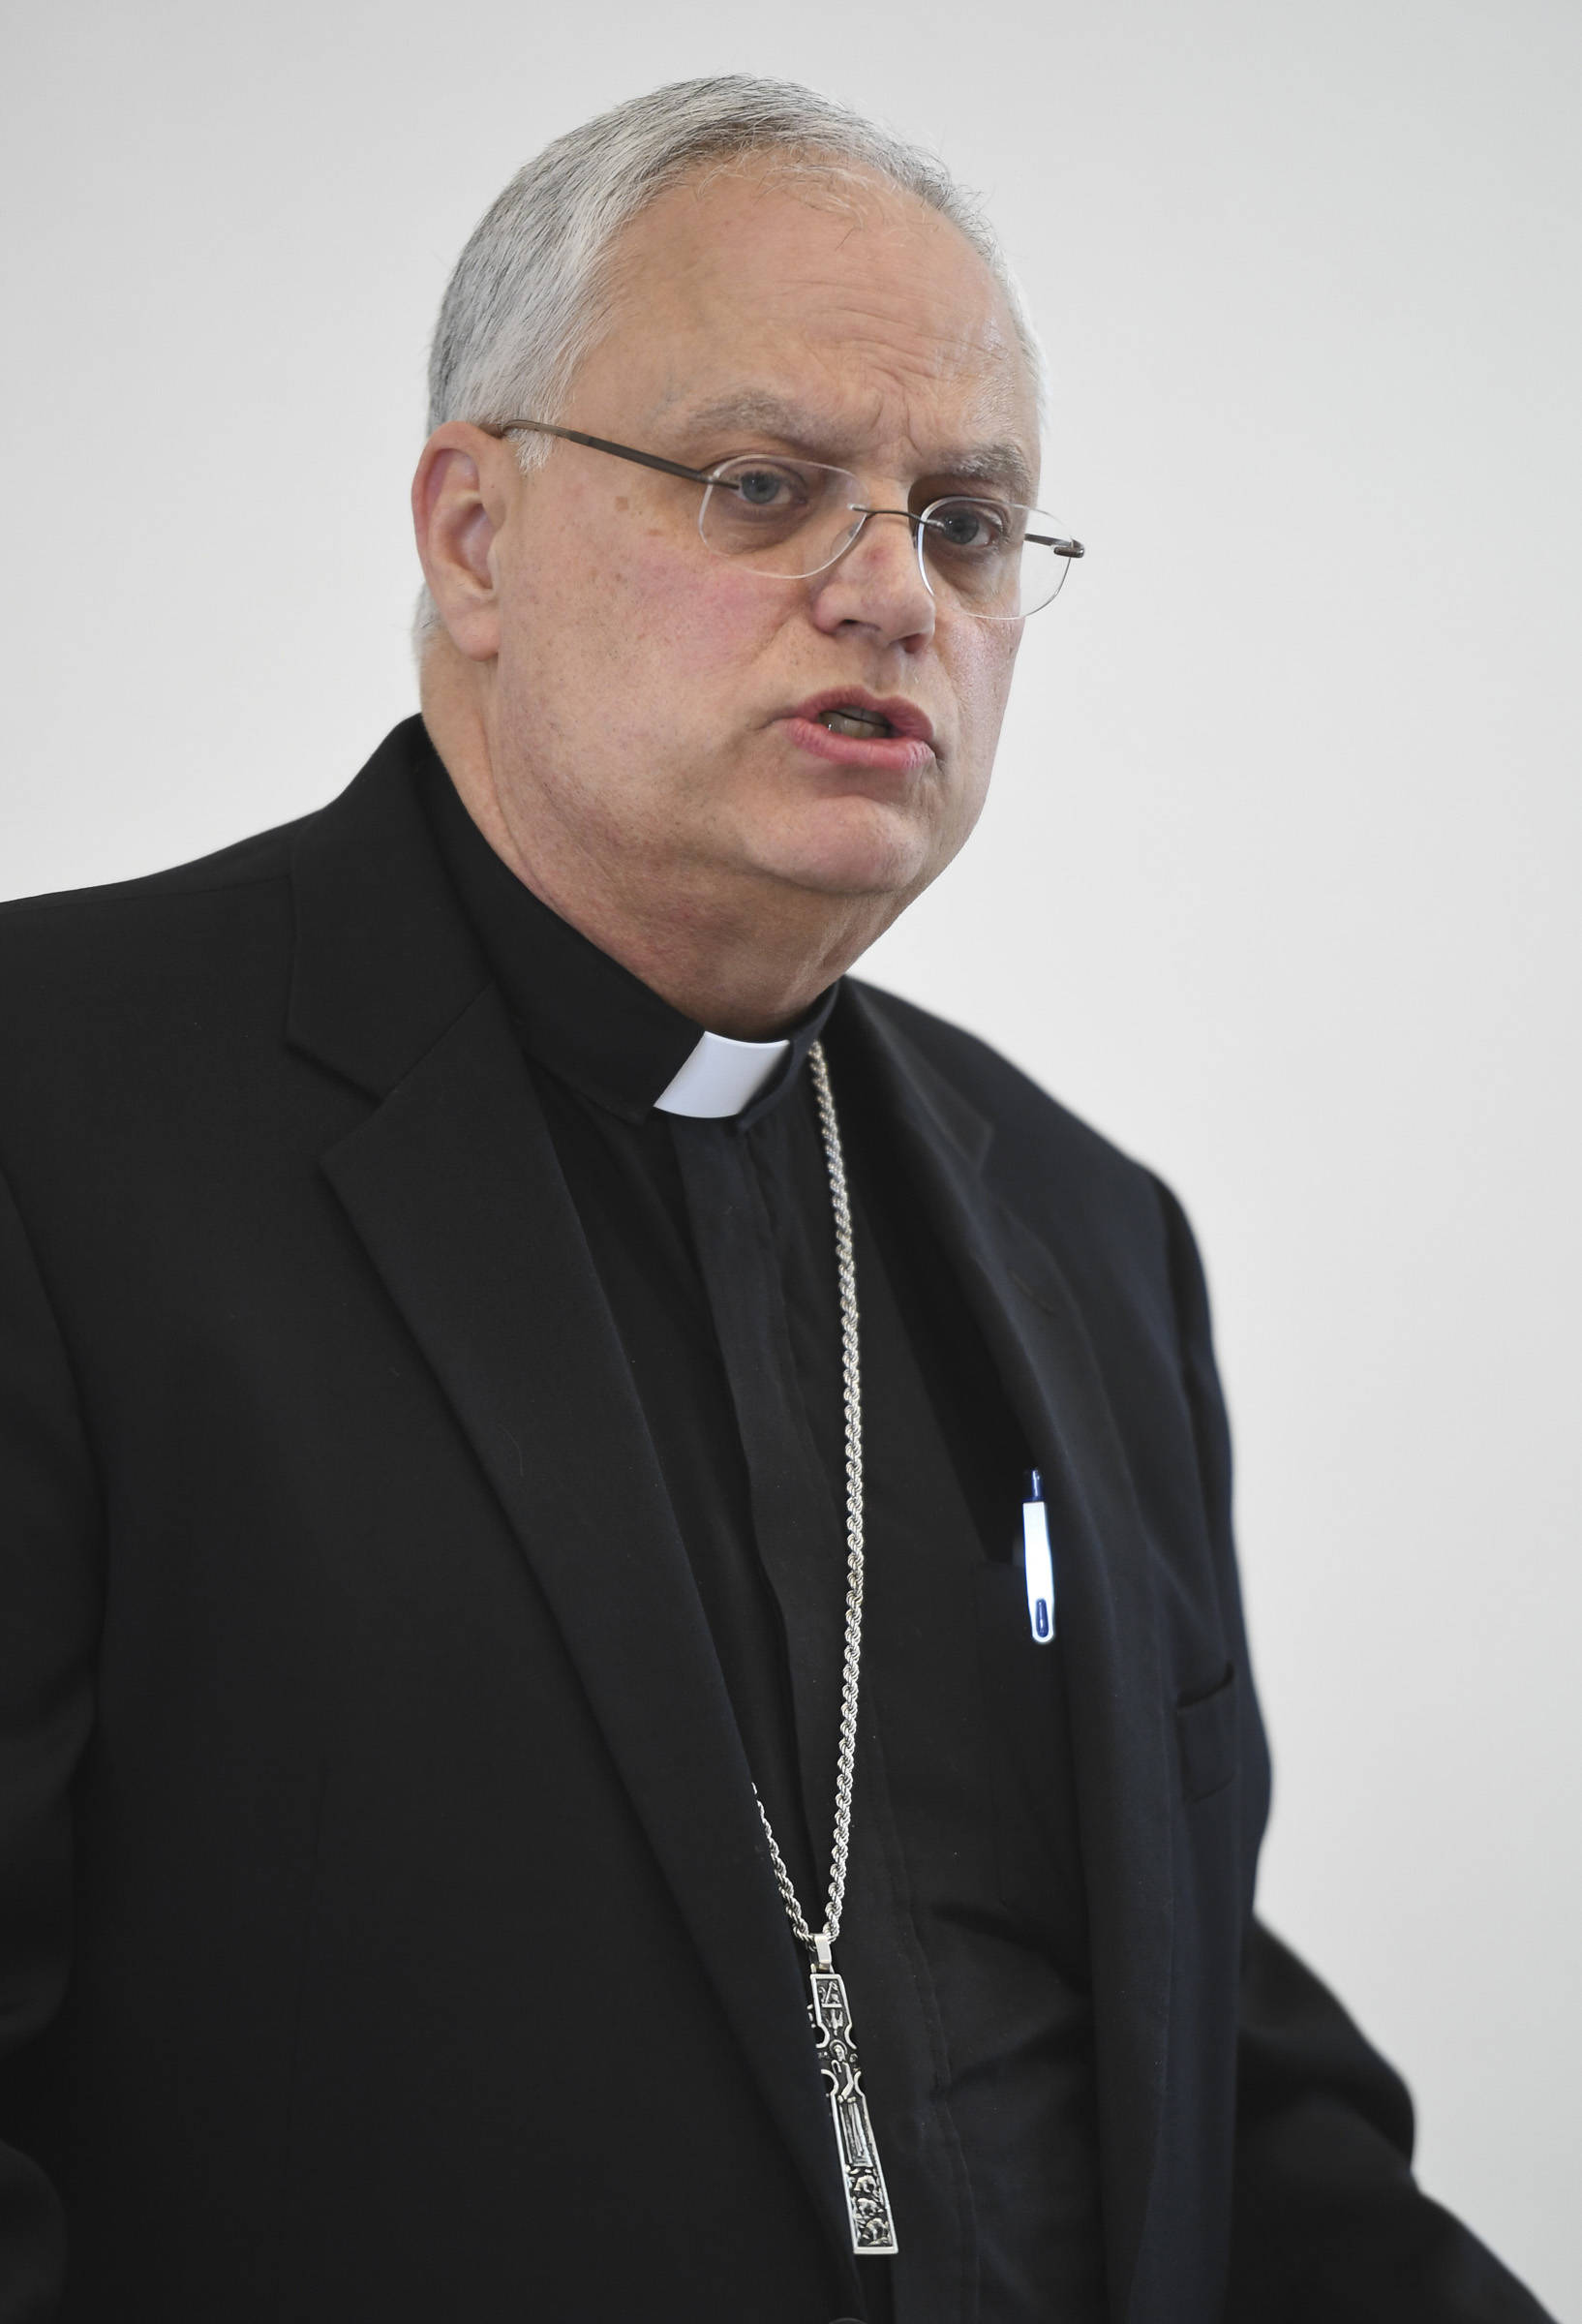 Father Andrew E. Bellisario, the Bishop of the Diocese of Juneau, holds a press conference to talk about an independent review he commissioned on allegations of sexual misconduct by clergymen in the Diocese on Wednesday, Aug. 21, 2019. (Michael Penn | Juneau Empire)